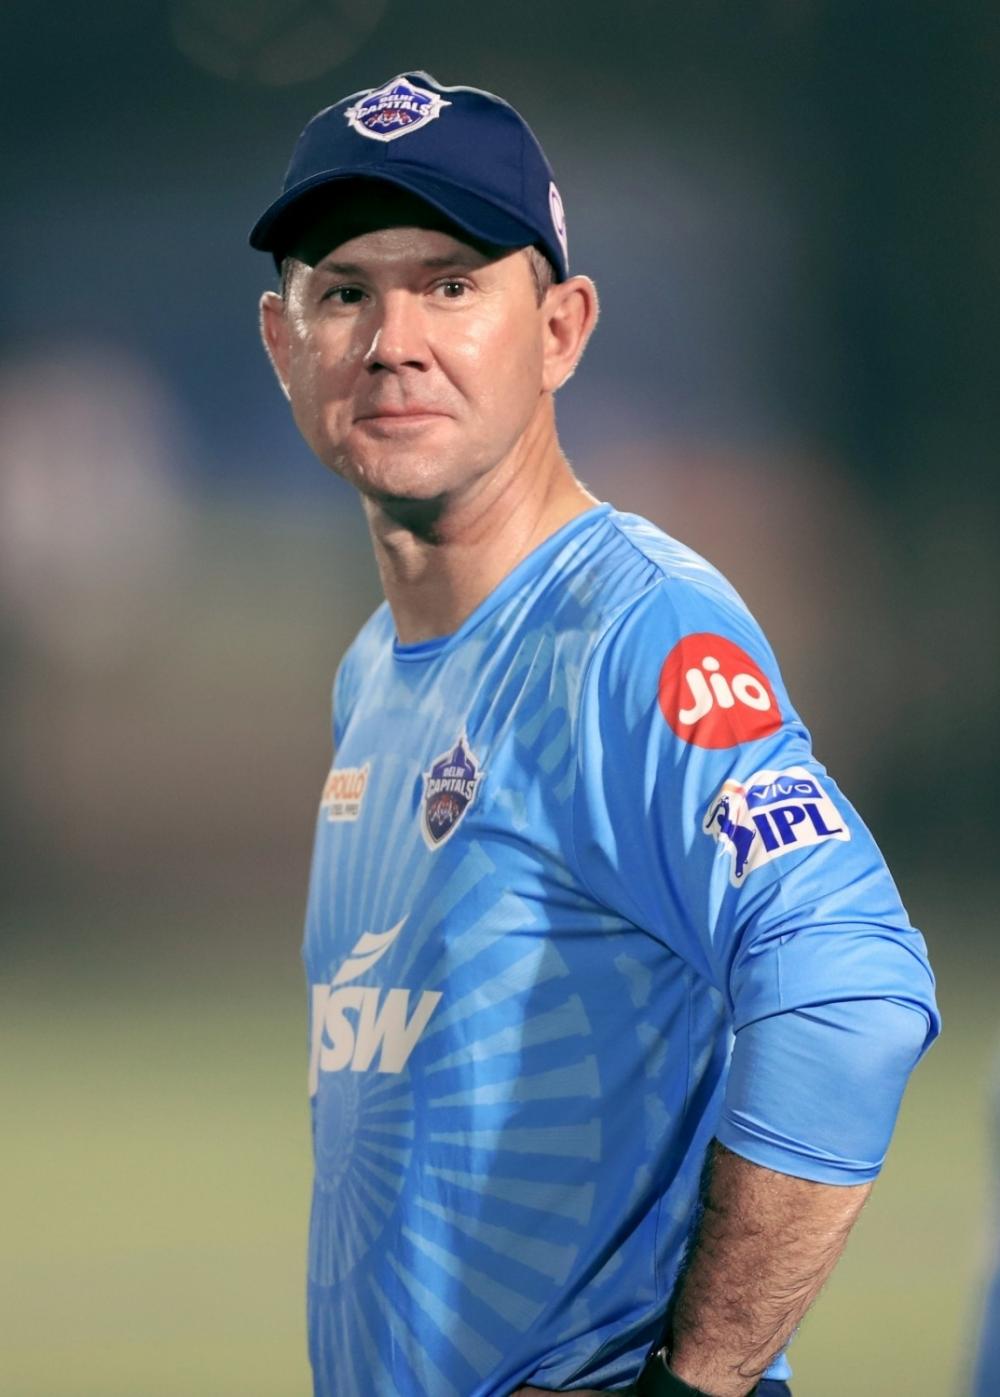 The Weekend Leader - Have been waiting for four months to join Delhi Capitals camp: Ponting